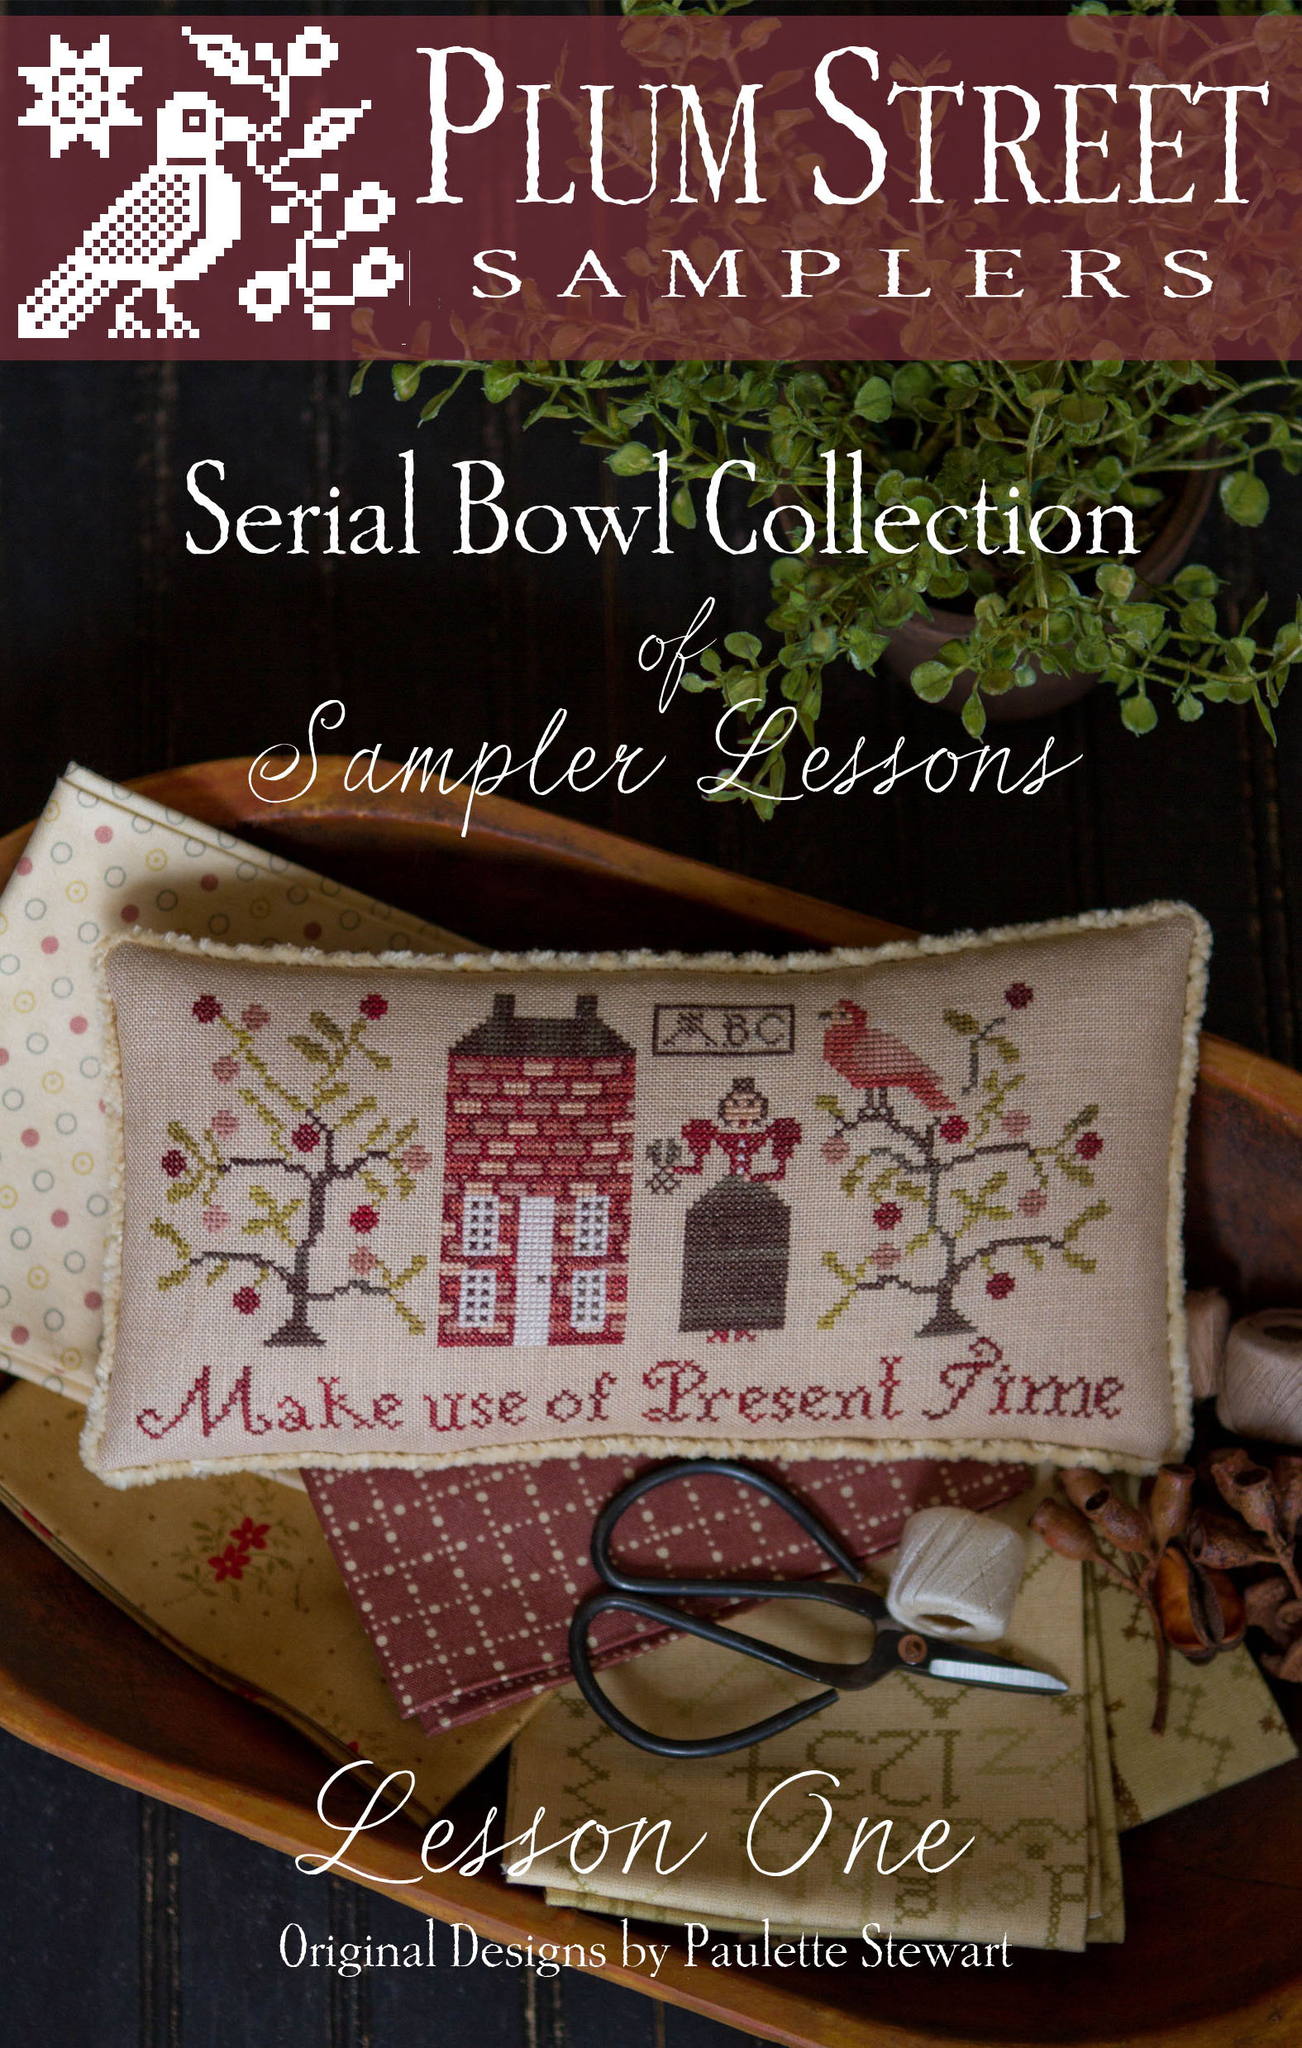 Serial Bowl Collection - Lesson One